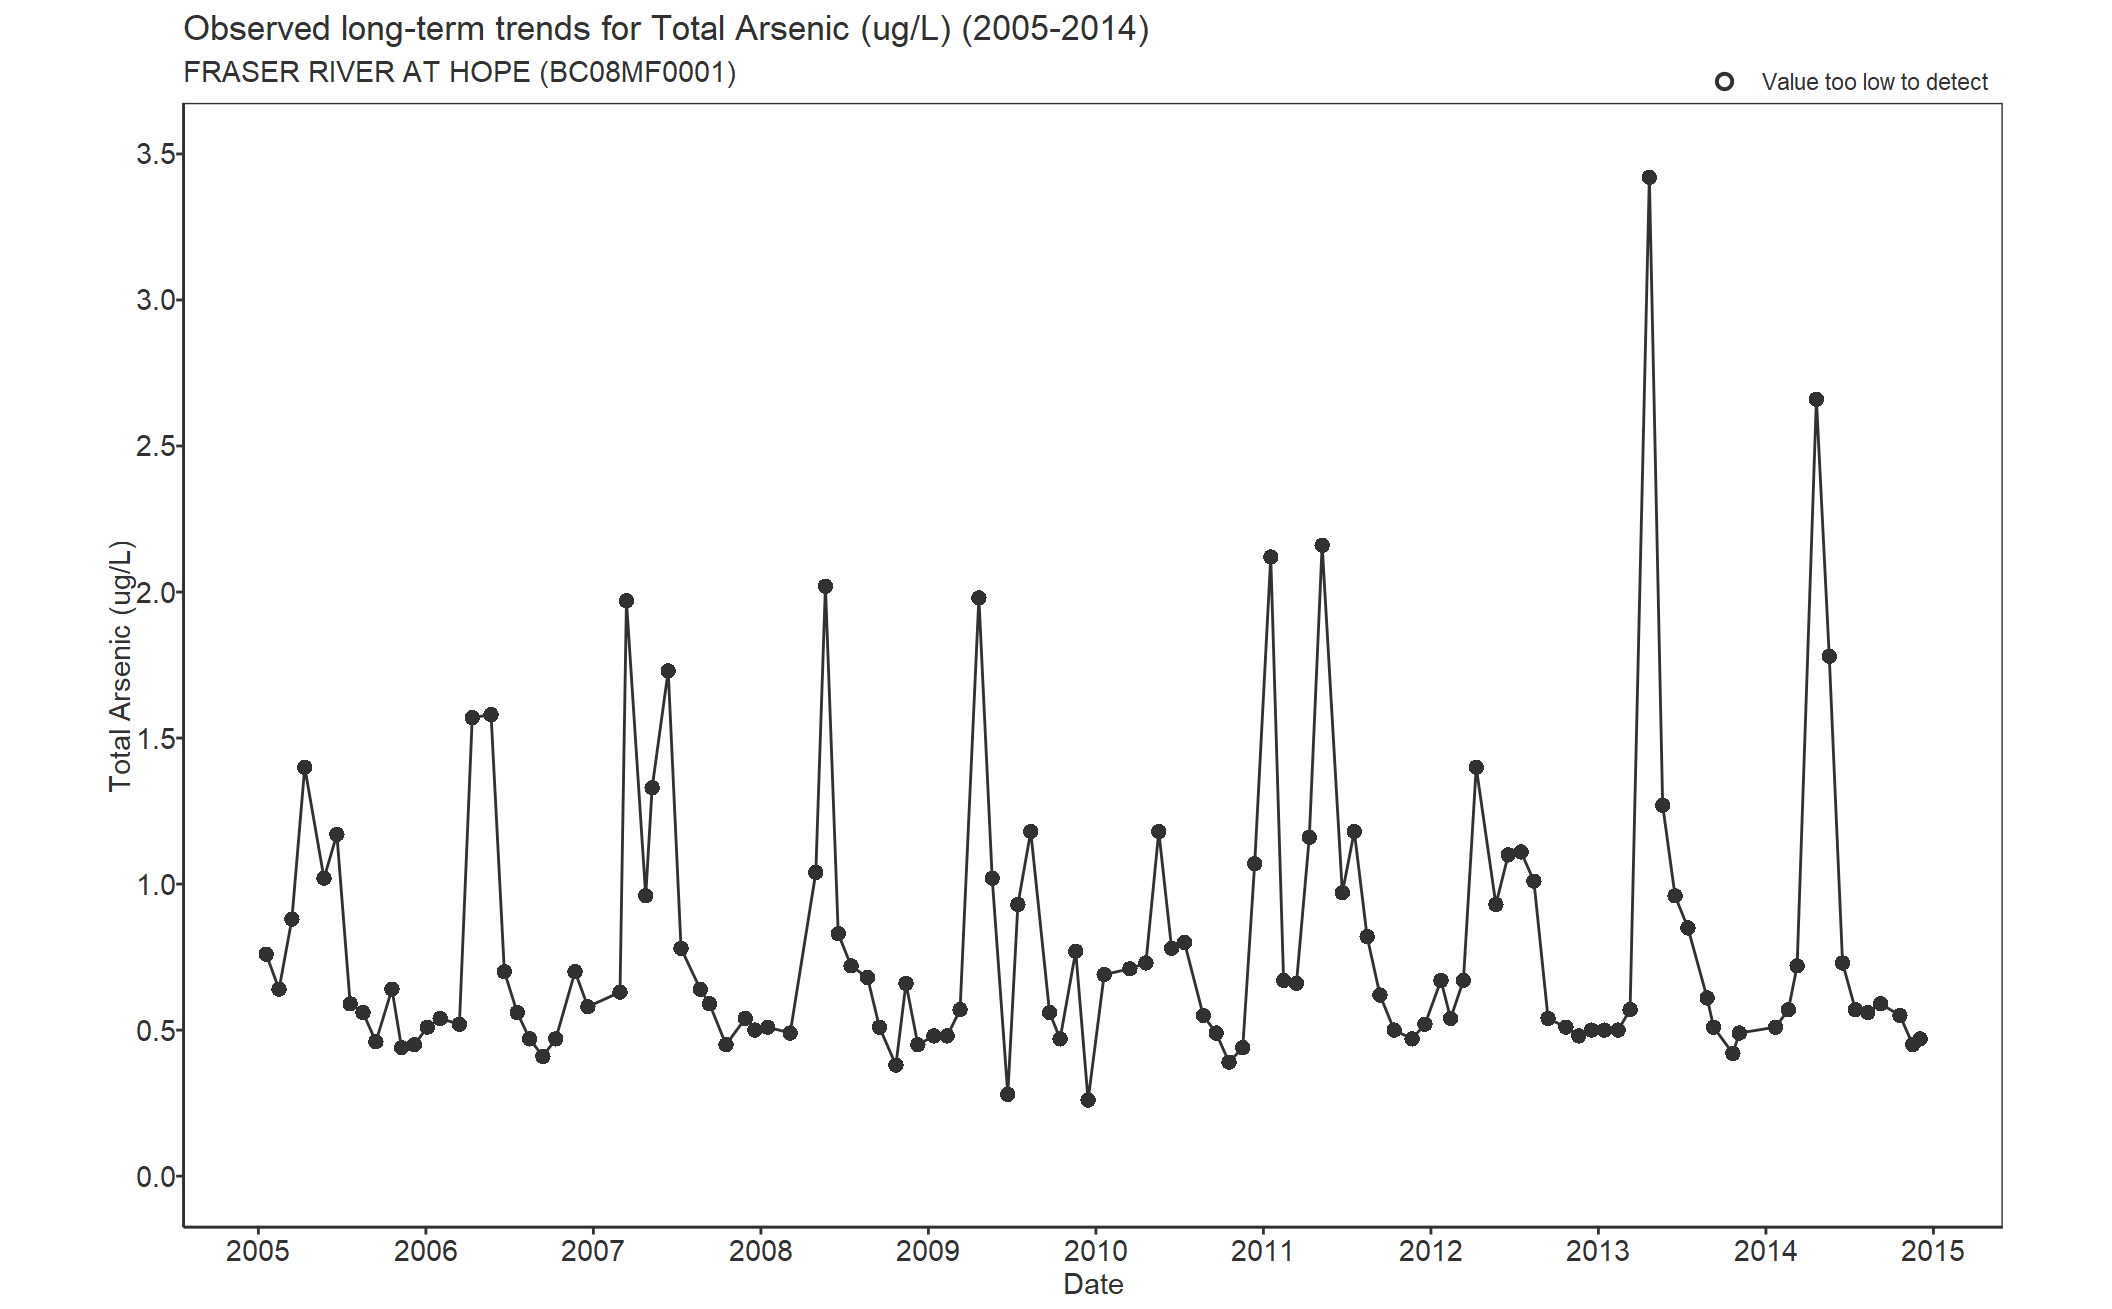 Observed long-term trends for Arsenic Total (2005-2014)